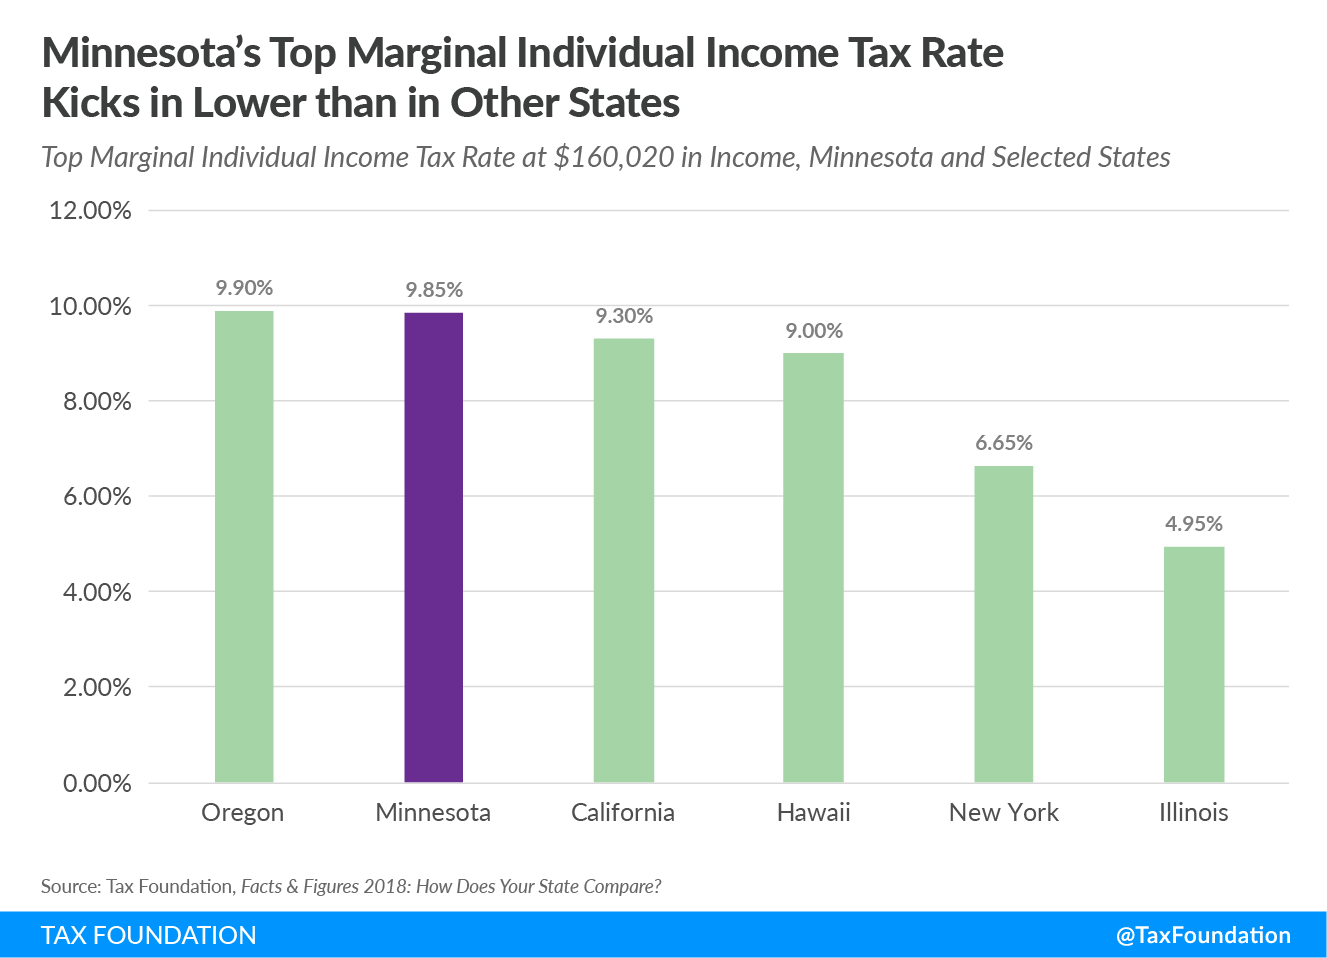 Minnesota’s Top Marginal Individual Income Tax Rate Kicks in Lower than in Other States 